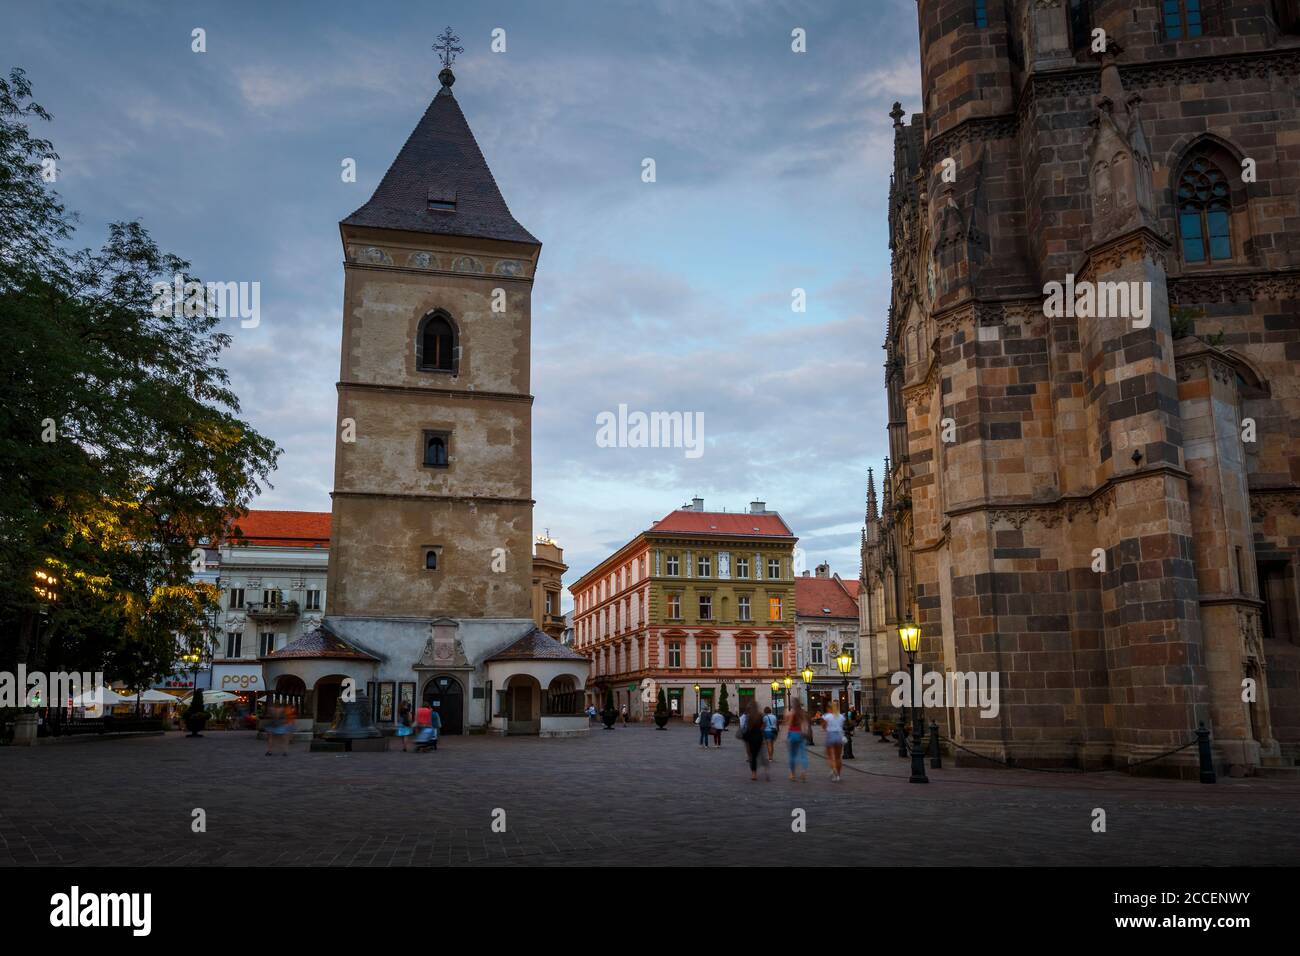 Kosice, Slovakia - August 11, 2018: Urban's Tower next to the cathedral in the main square of Kosice city in eastern Slovakia. Stock Photo